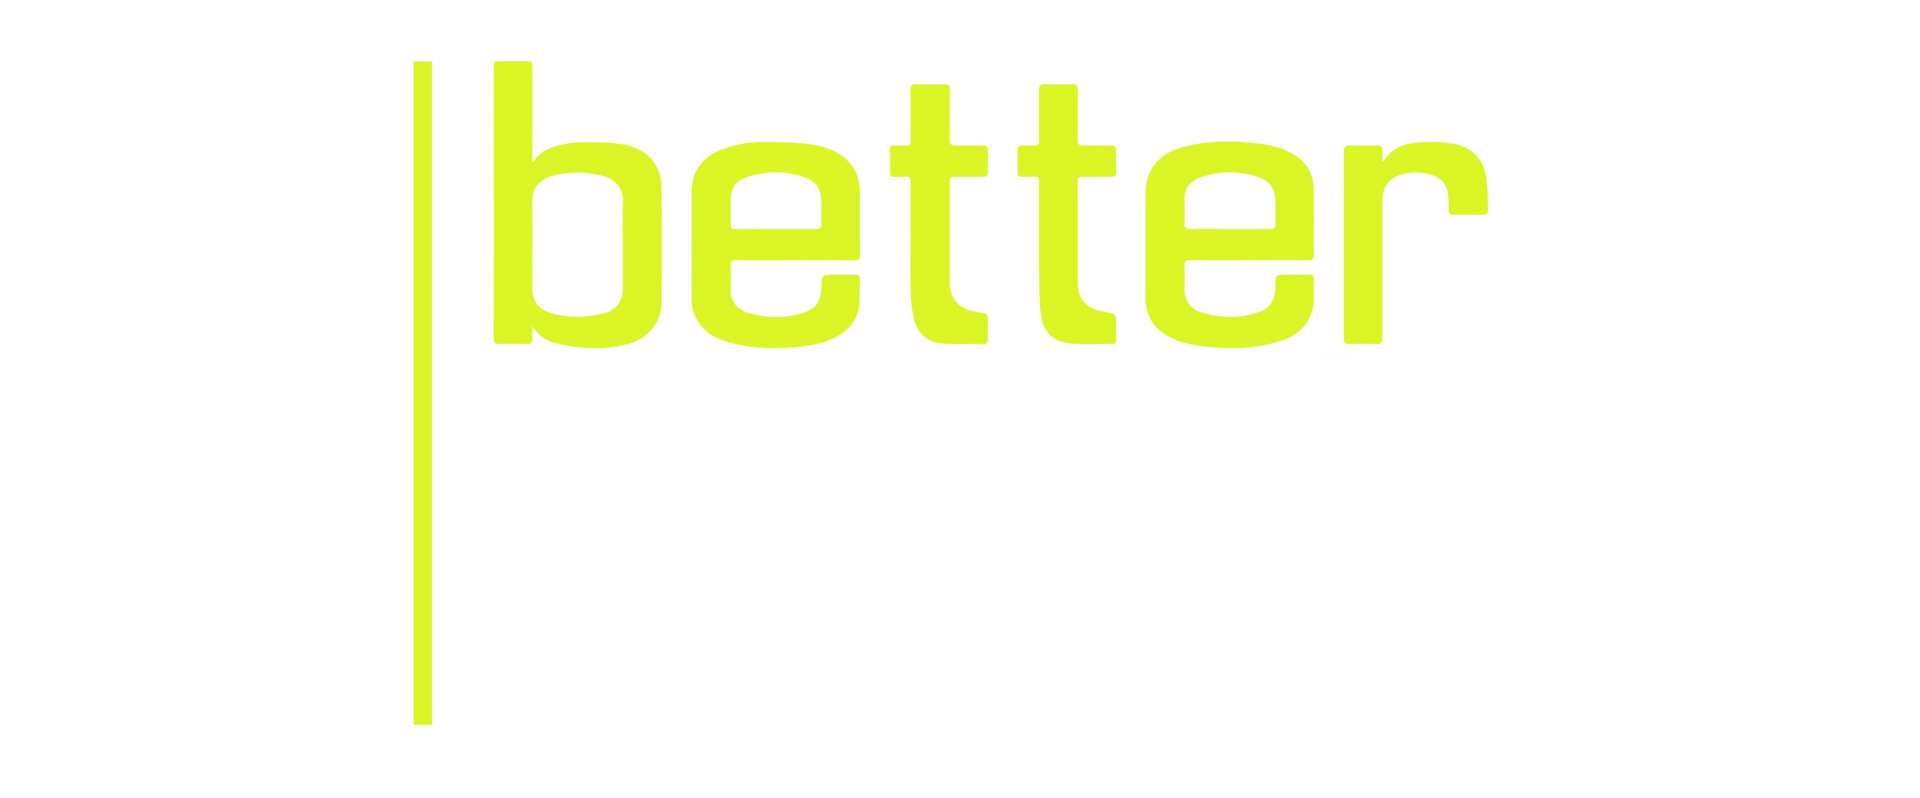 The Better Wash